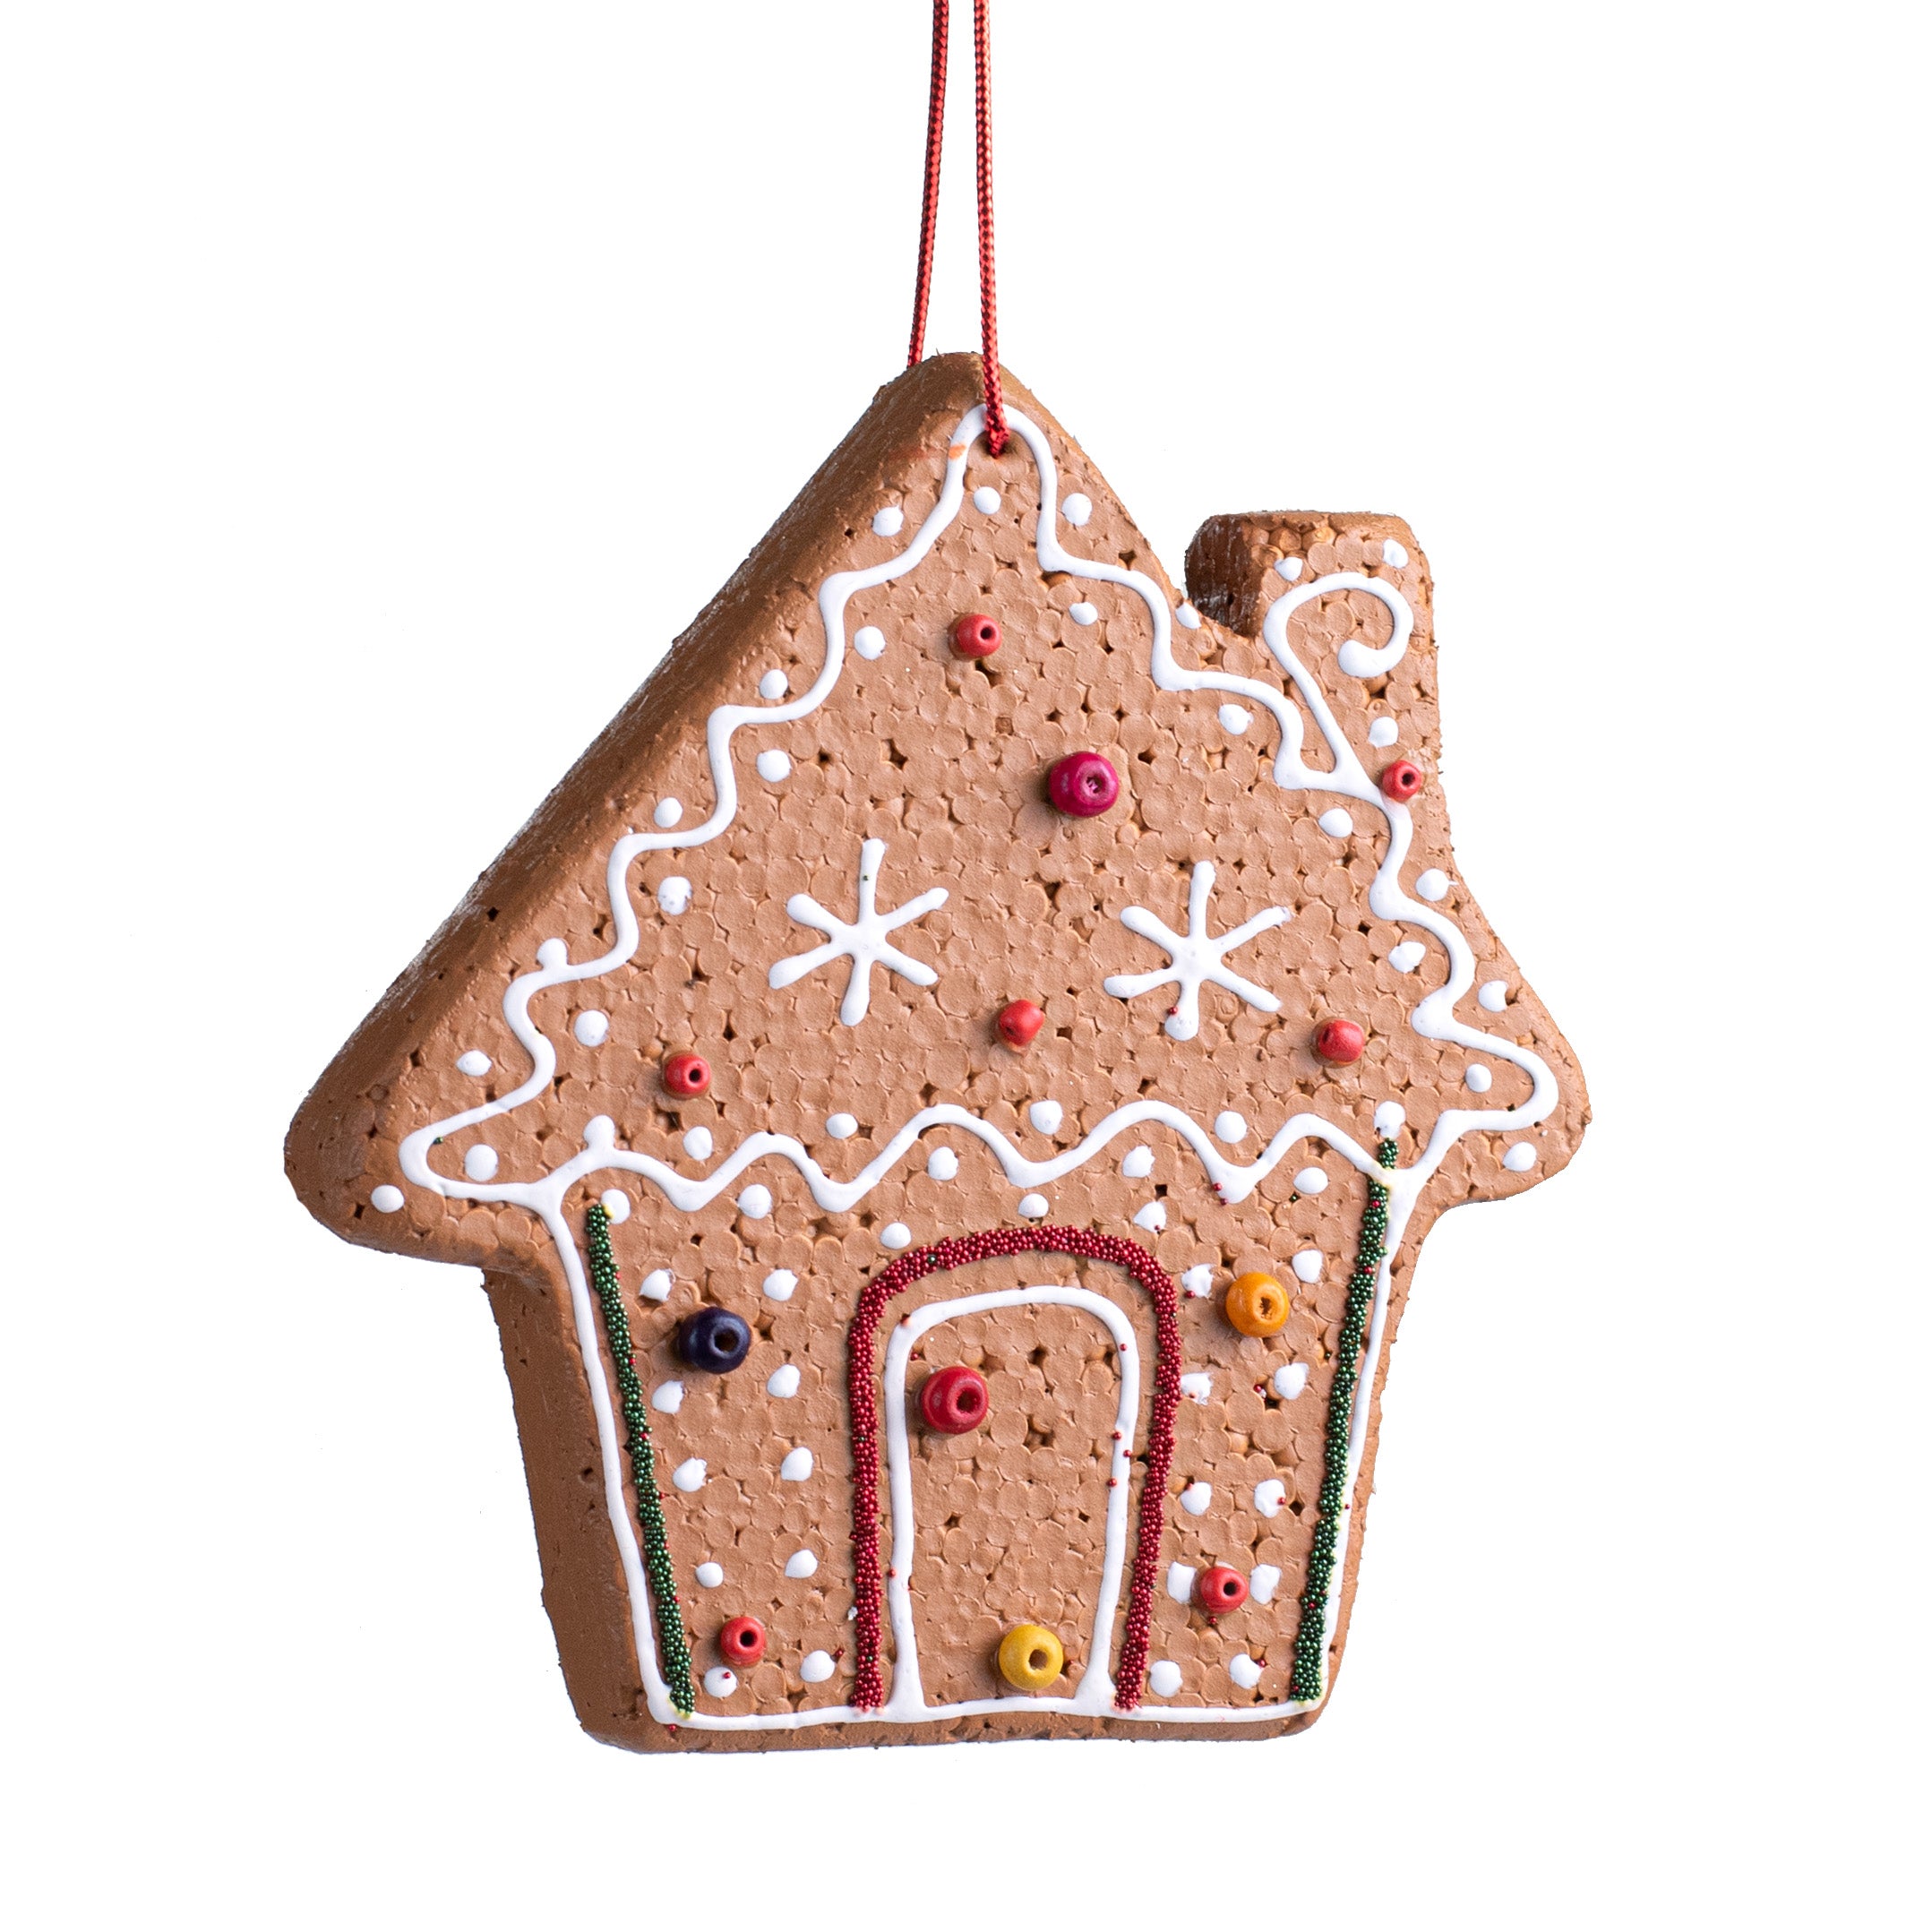 5.5" Gingerbread House Ornament